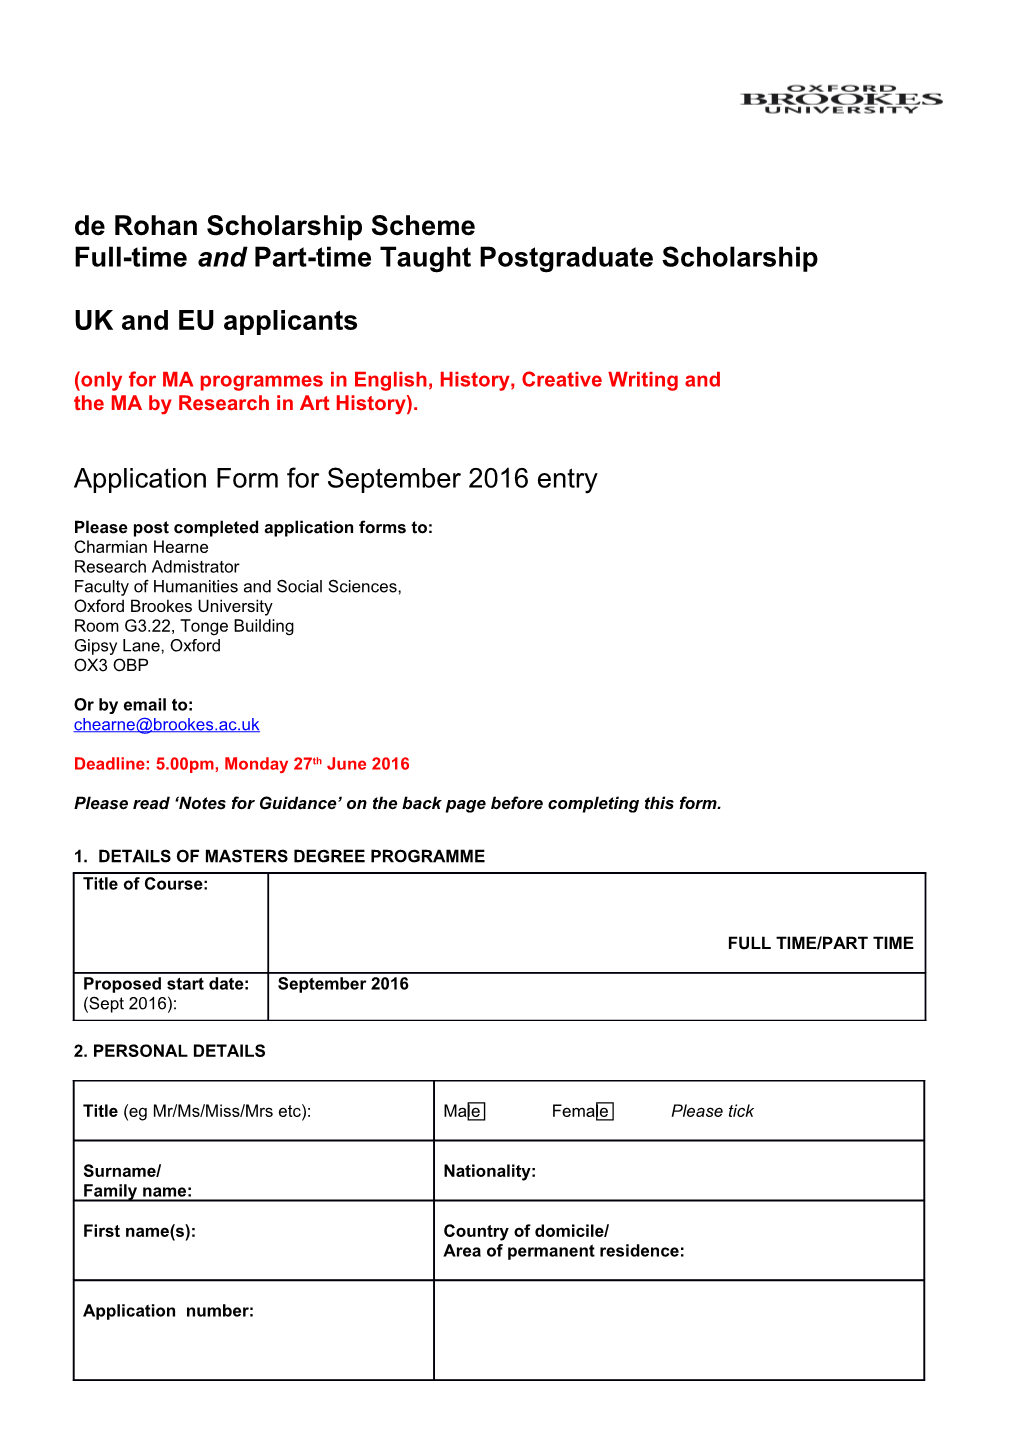 Full-Time and Part-Time Taught Postgraduate Scholarship